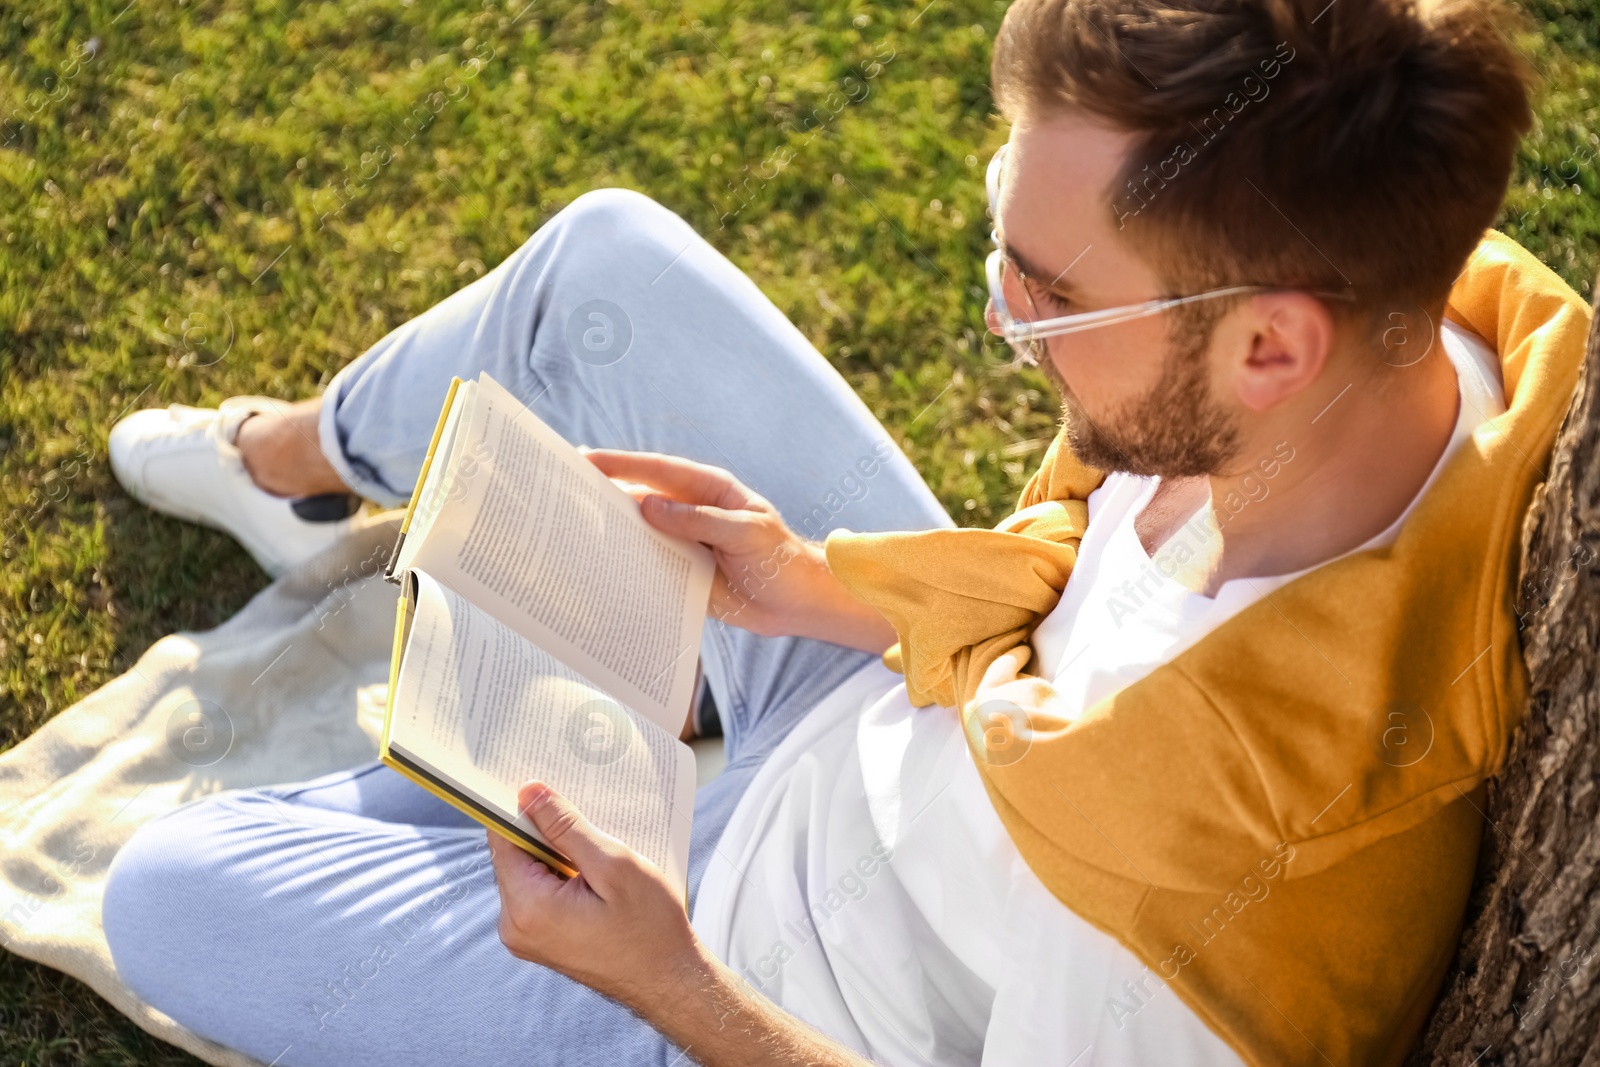 Photo of Young man reading book on green grass near tree in park